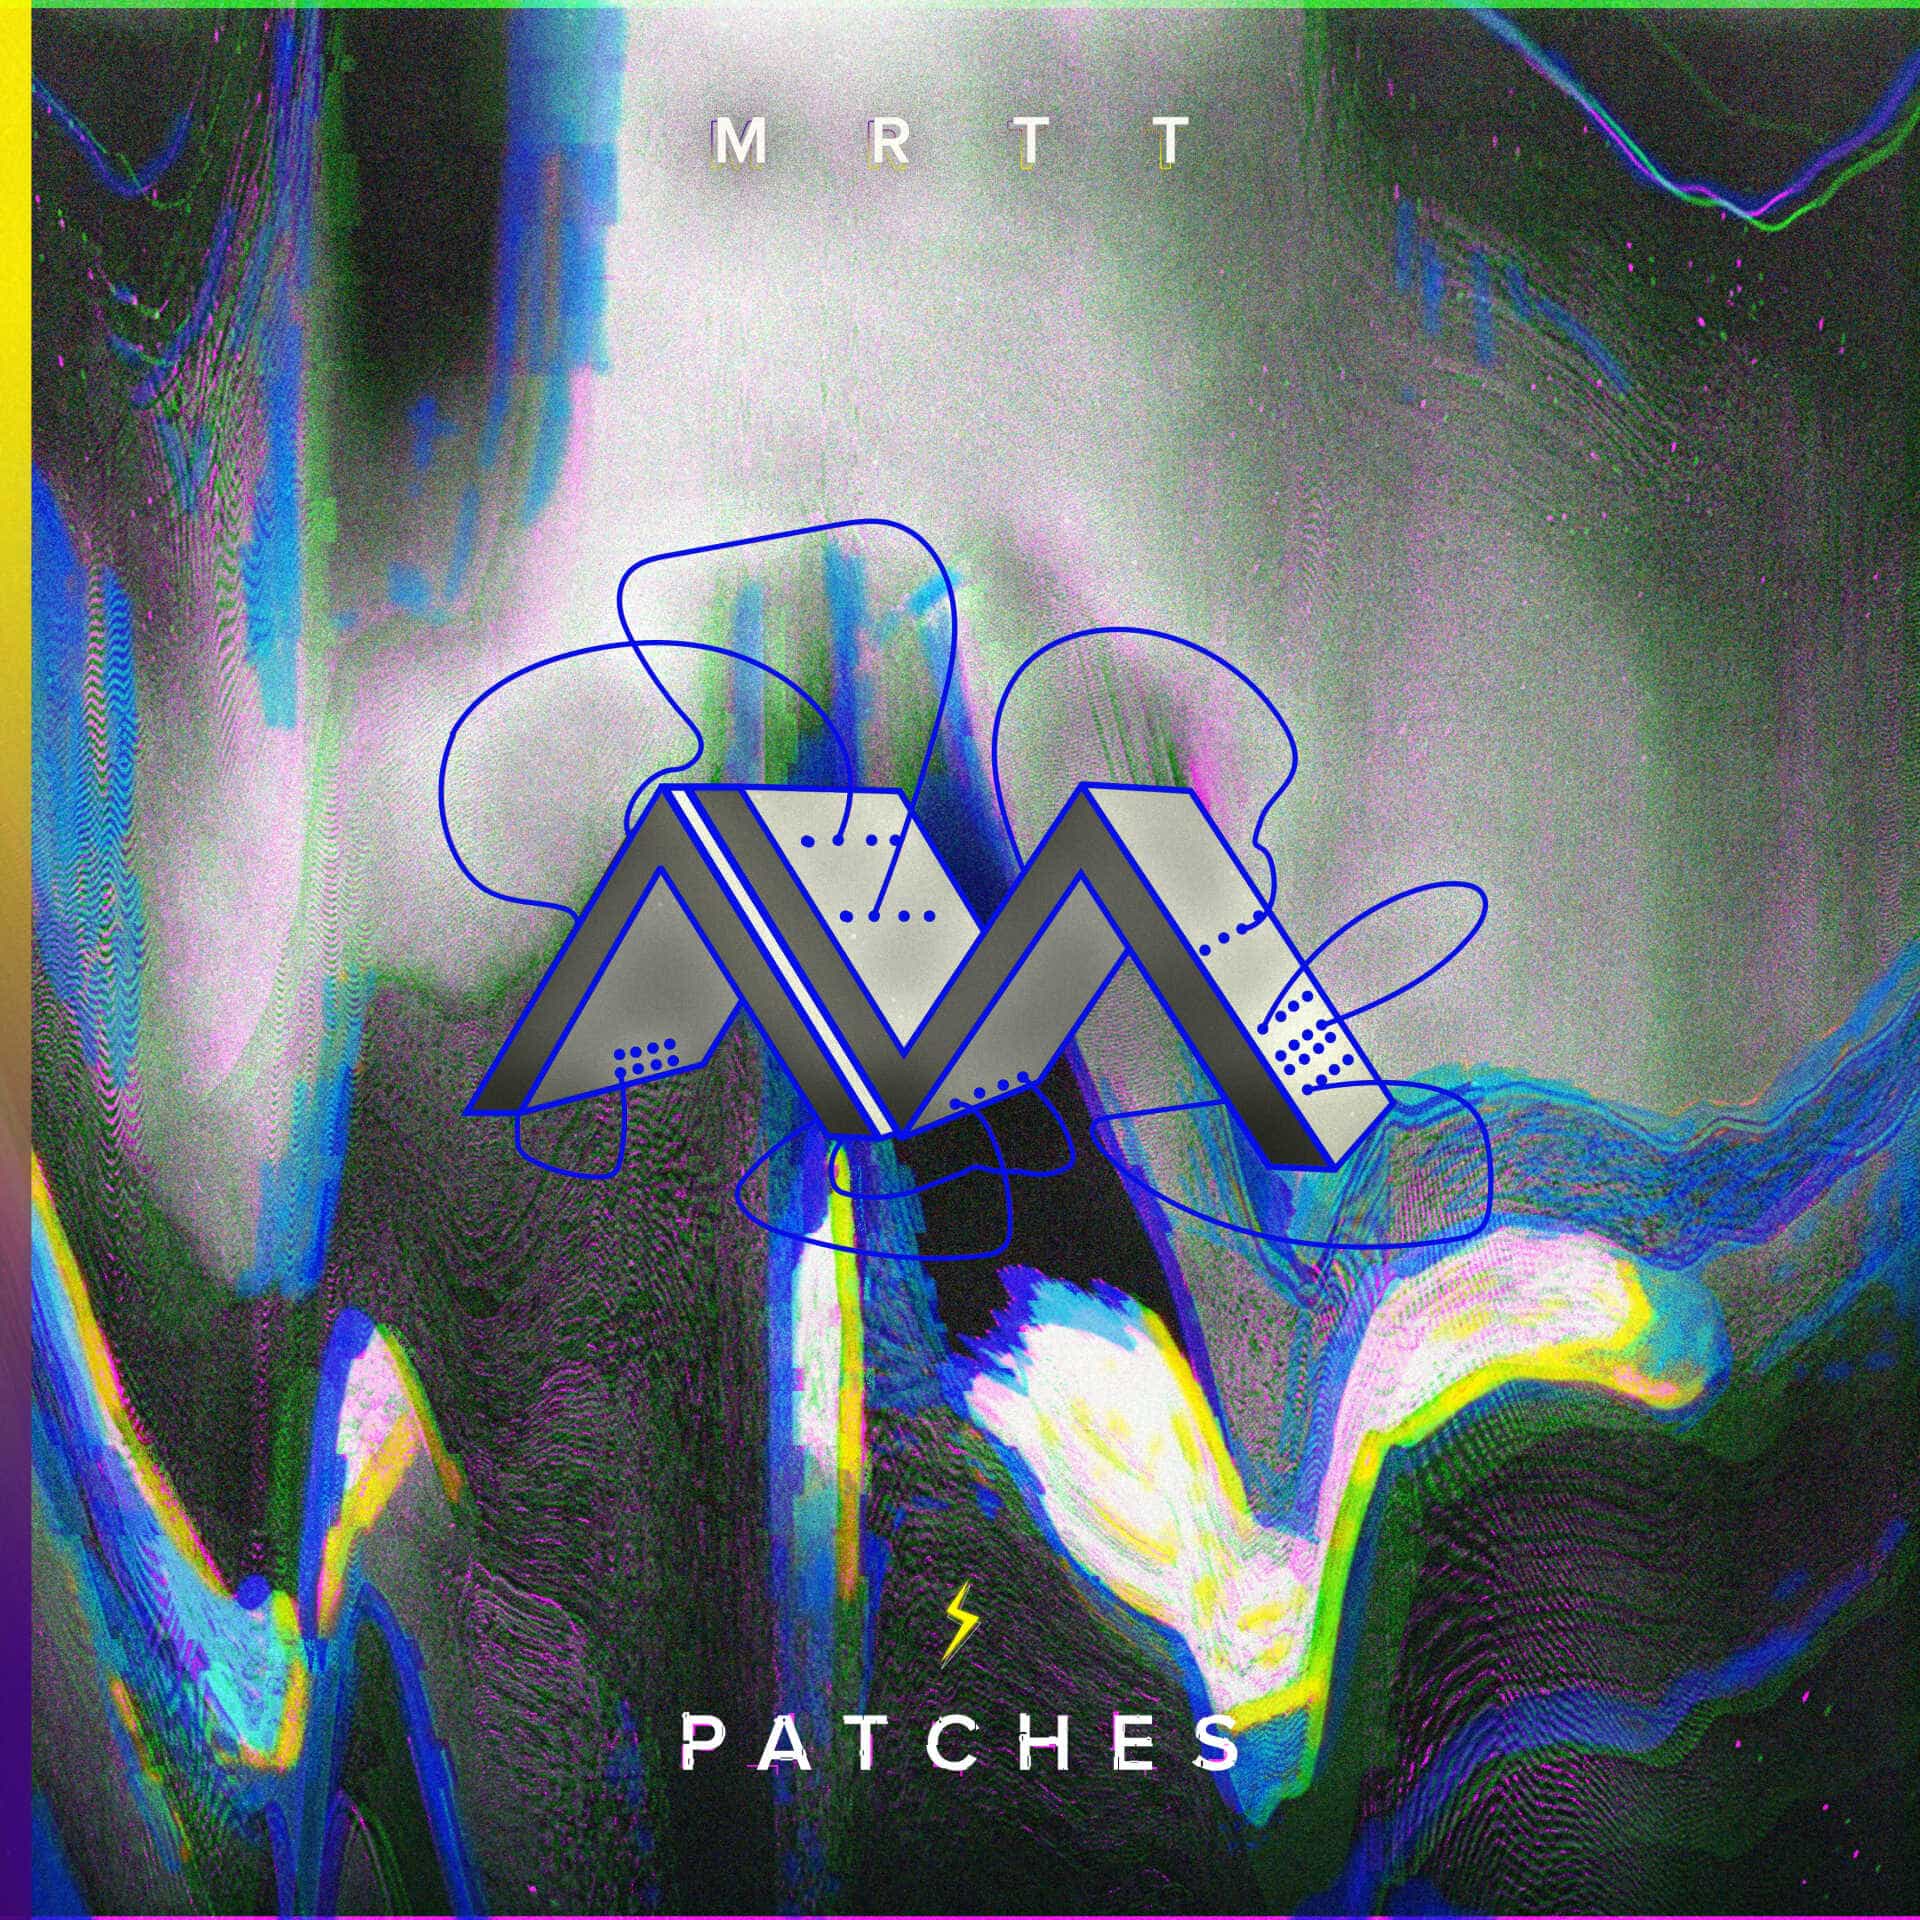 The artwork for the single Patches by Mariatti